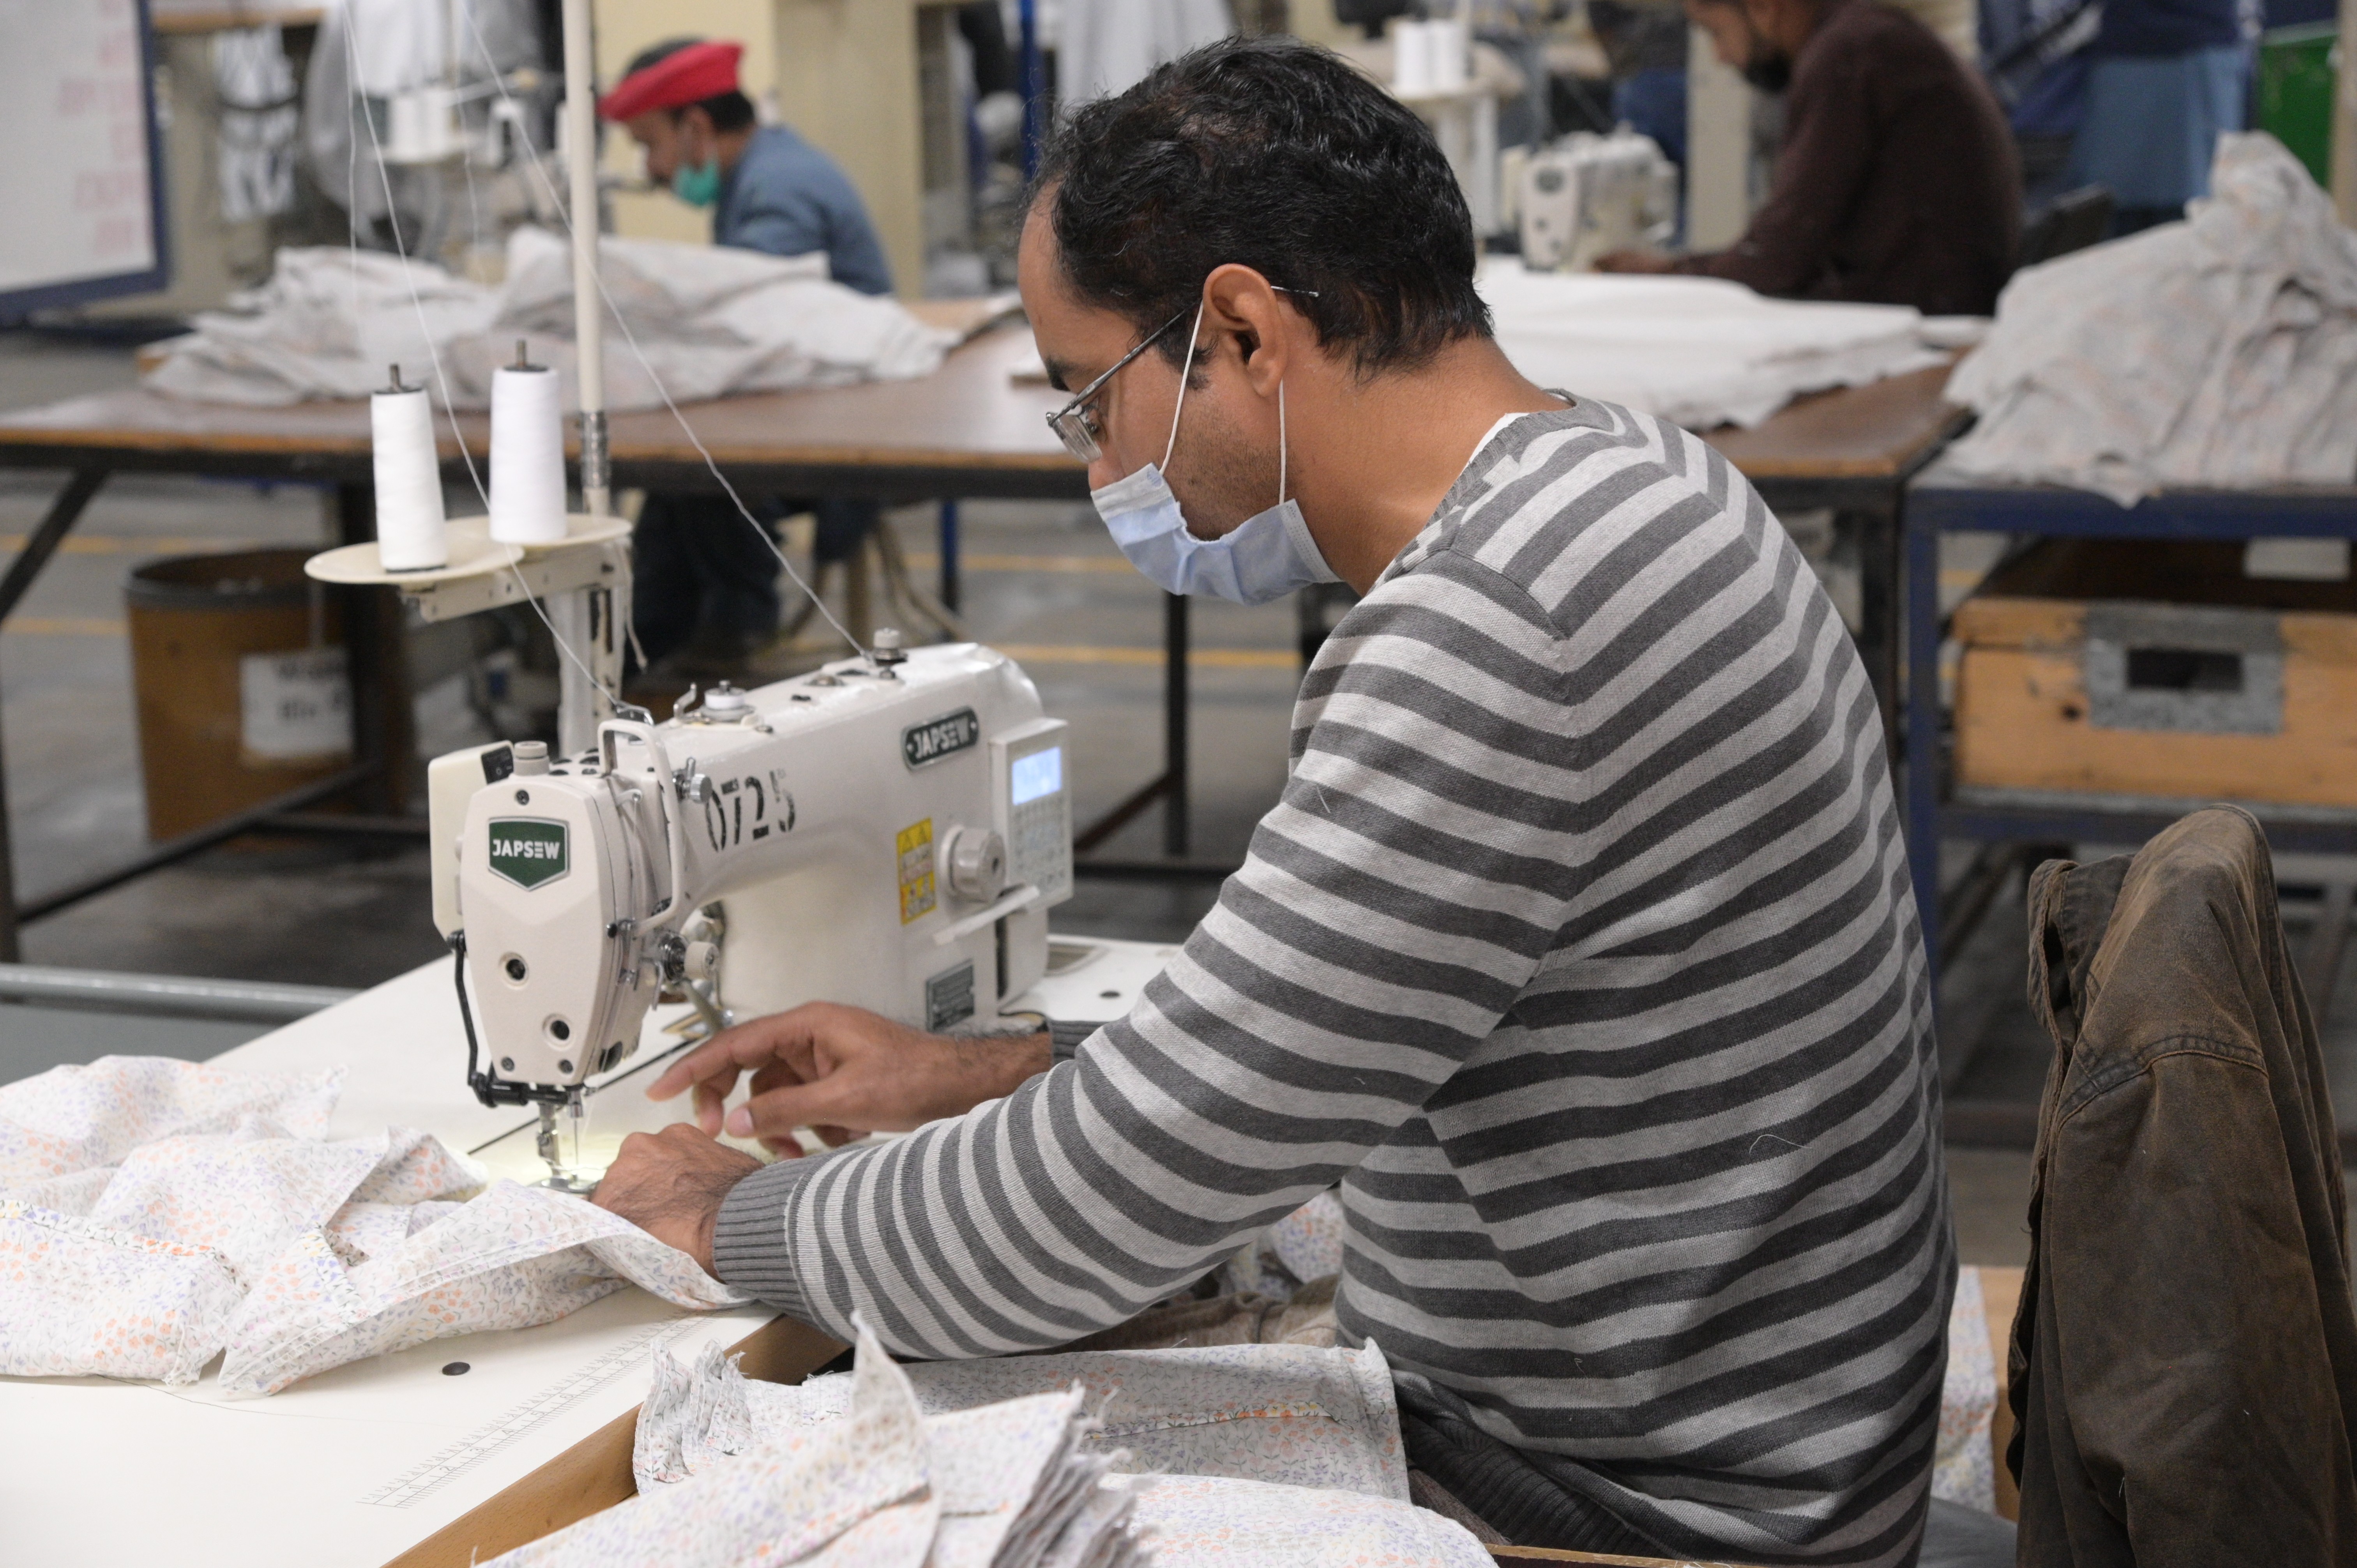 A man sewing cushion covers in the textile industry